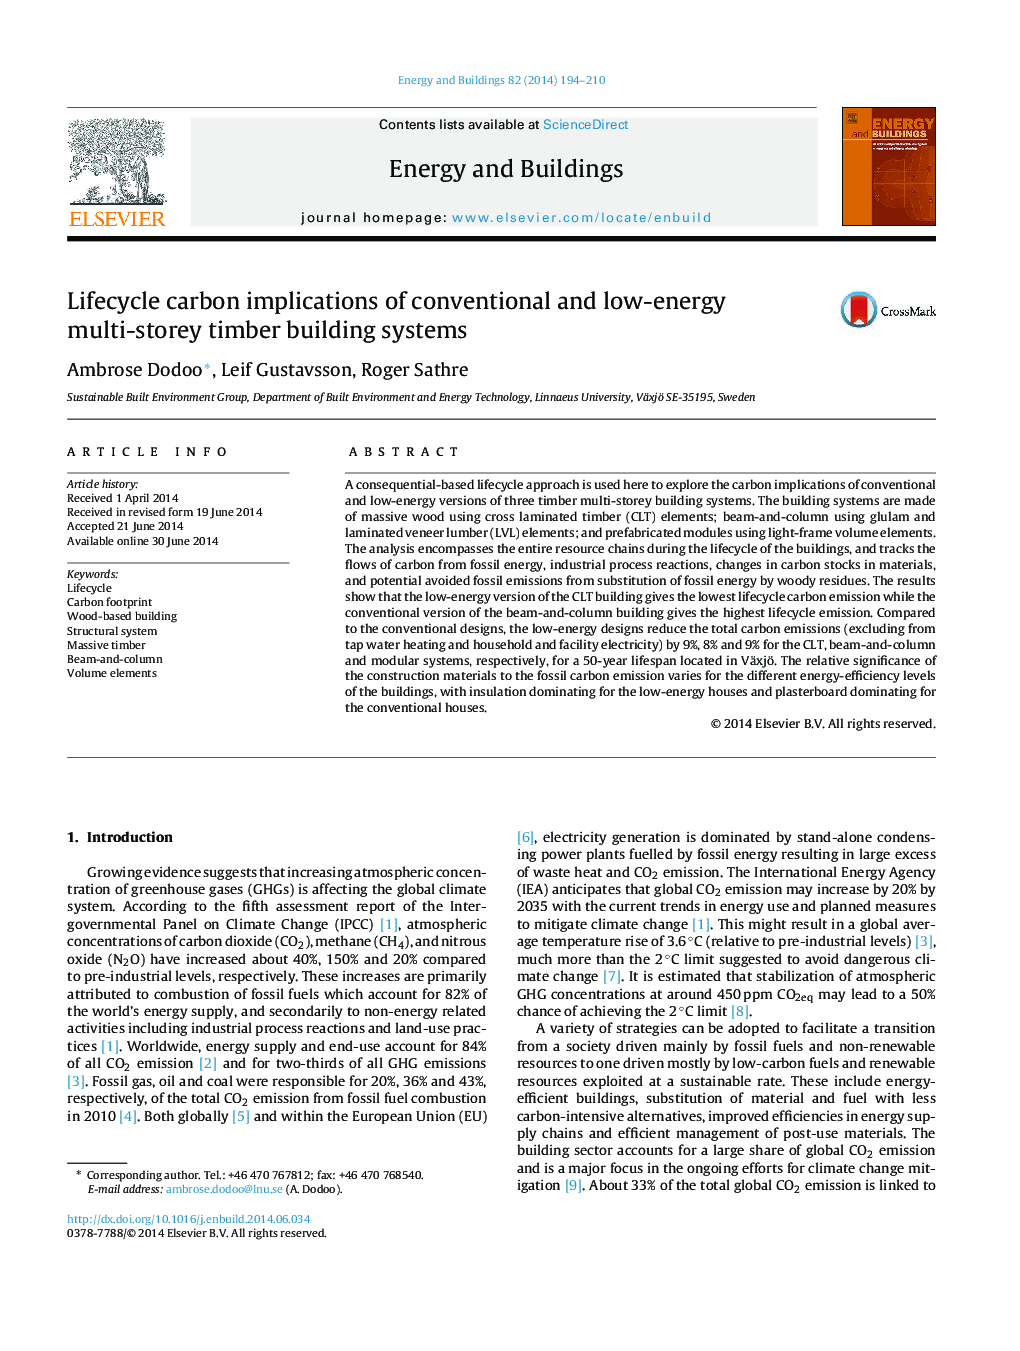 Lifecycle carbon implications of conventional and low-energy multi-storey timber building systems